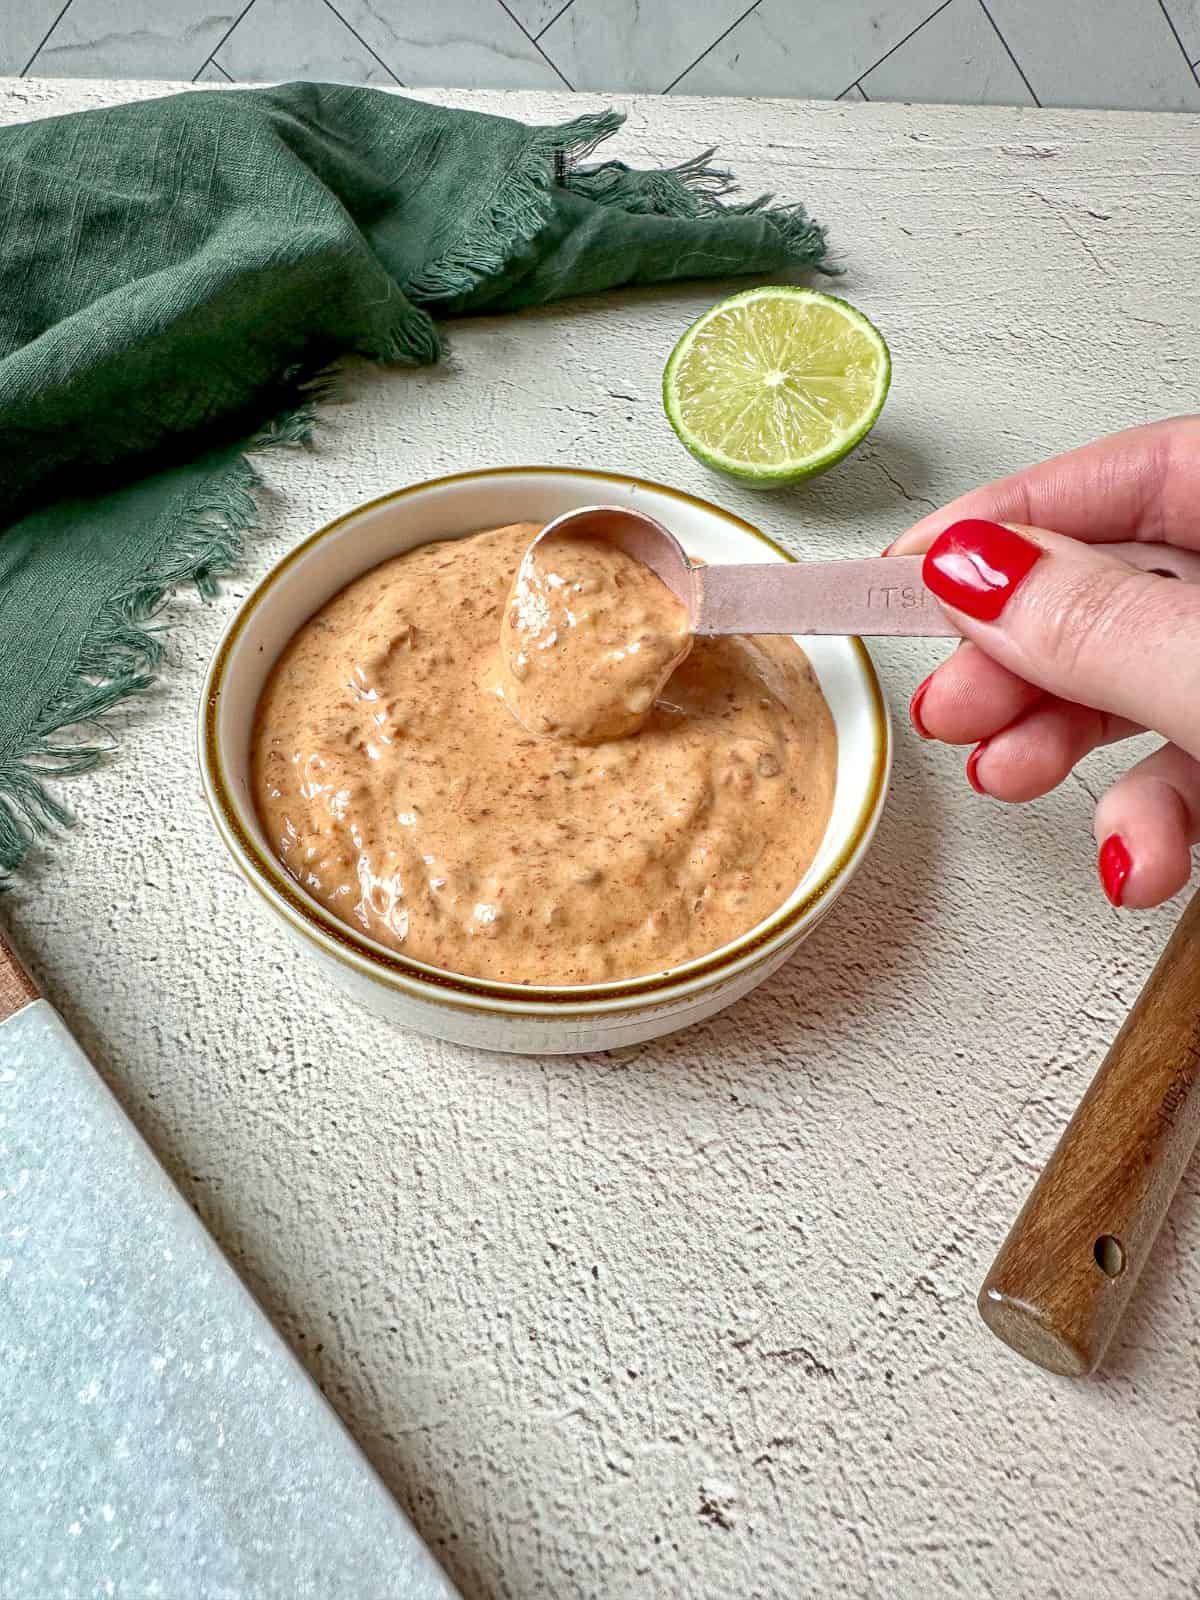 A hand holding a measuring spoon dipping into a bowl of the light orange colored mayo sauce. Sauce is smooth with a few chunks of chipotle peppers.